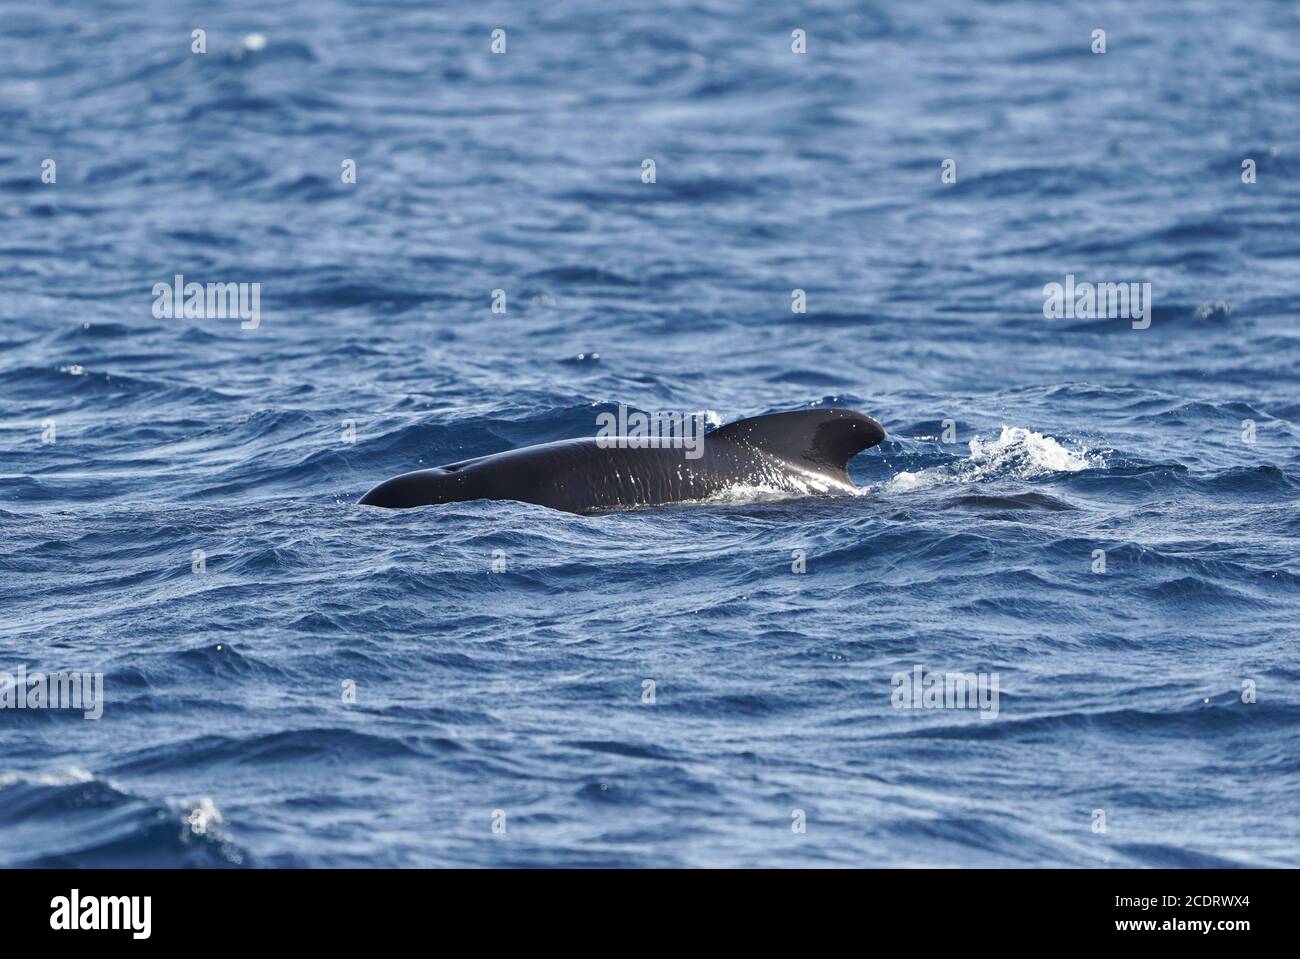 Long-finned pilot whales (Globicephala melas) spotted during whale watching trip. Strait of Gibraltar, Spain. Stock Photo